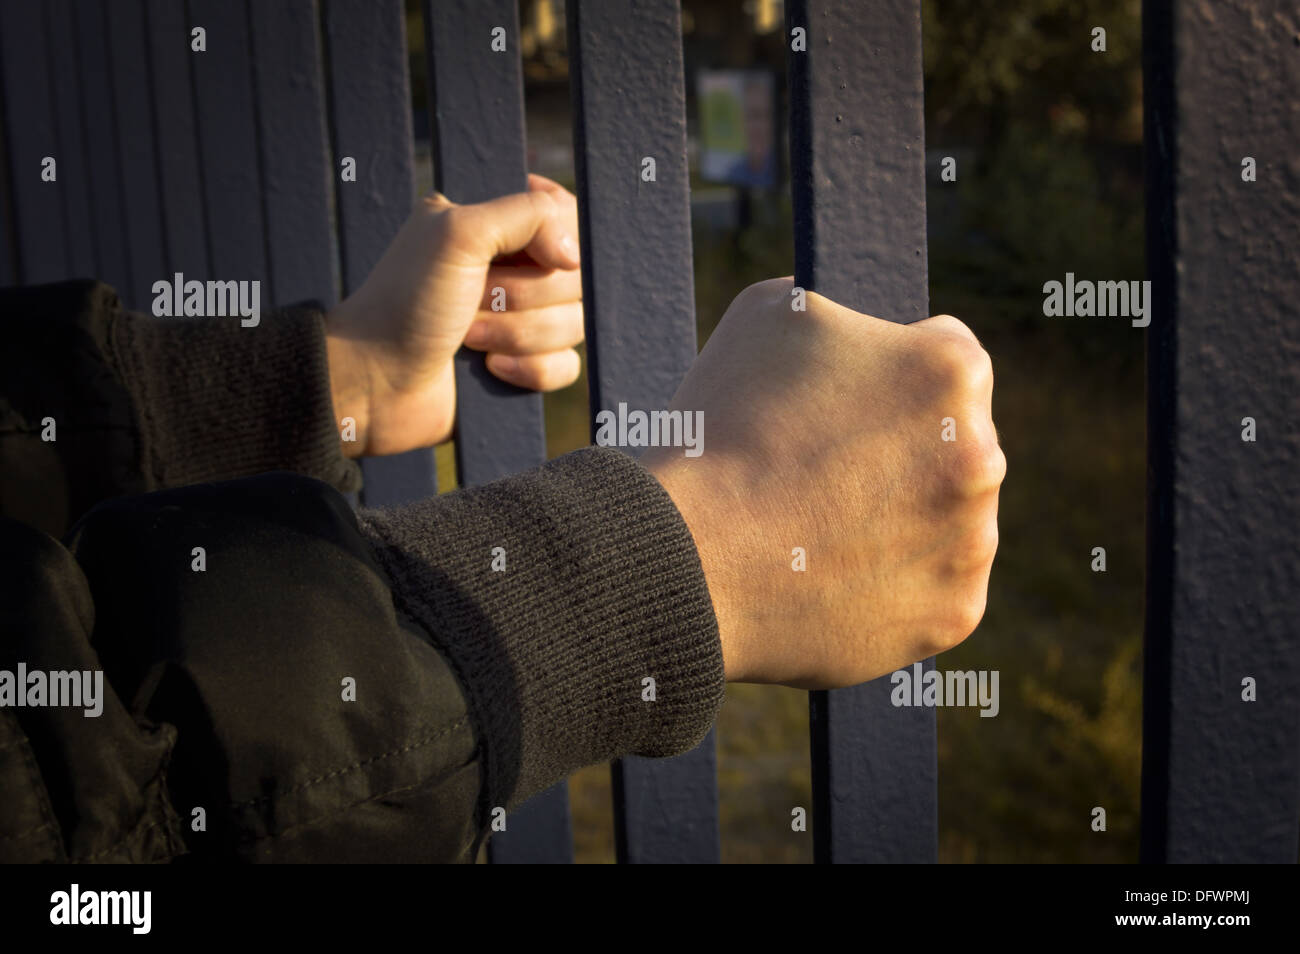 Hands holding the bars on both sides. Stock Photo